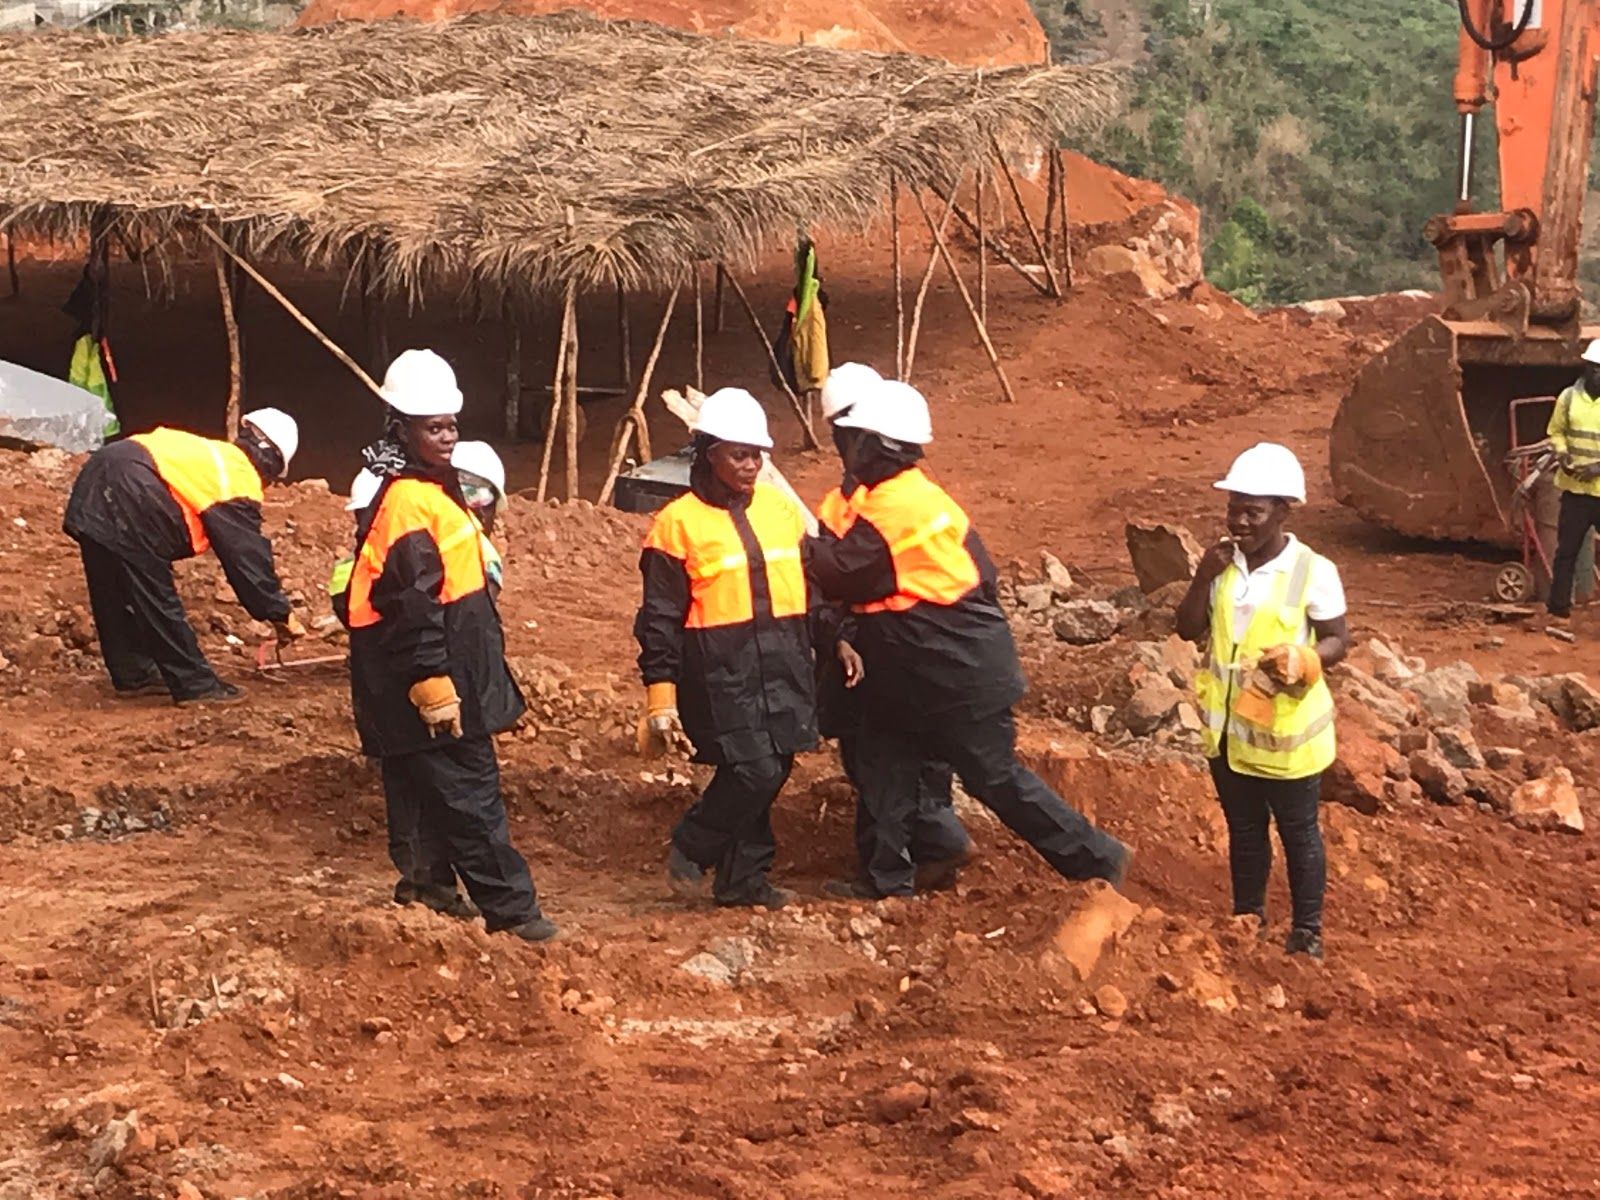 A United Nations initiative that hired local women to help excavate and replant trees along the now-barren mountainside. Image by Kadia Goba. Sierra Leone, 2018.